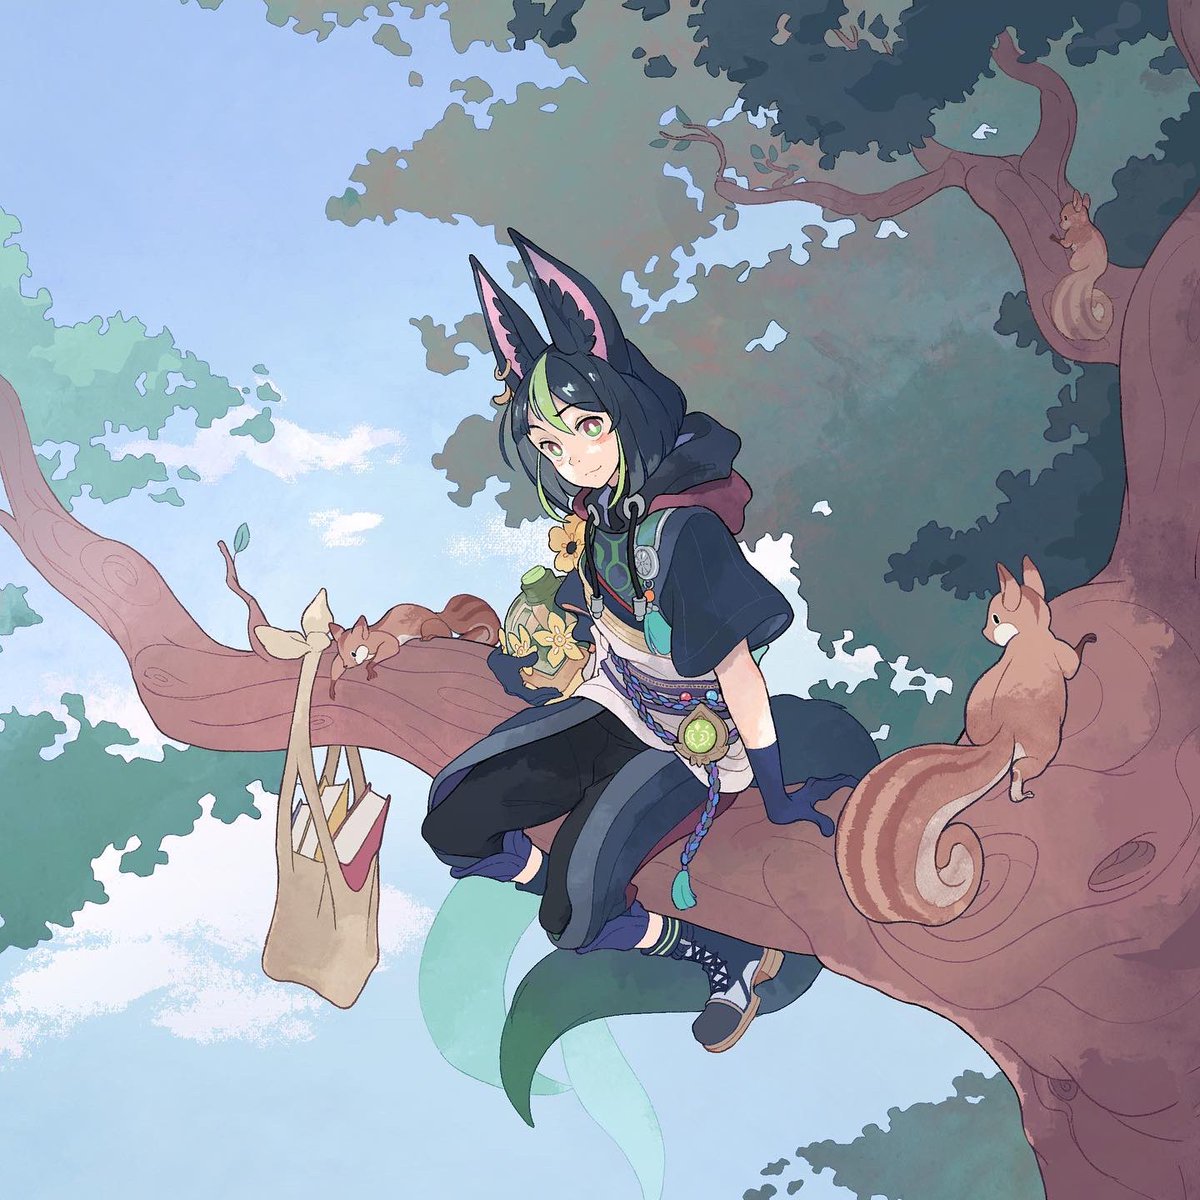 「Tighnari in a tree with some friends#Gen」|xephia 🌿 @overload 15th Aprilのイラスト